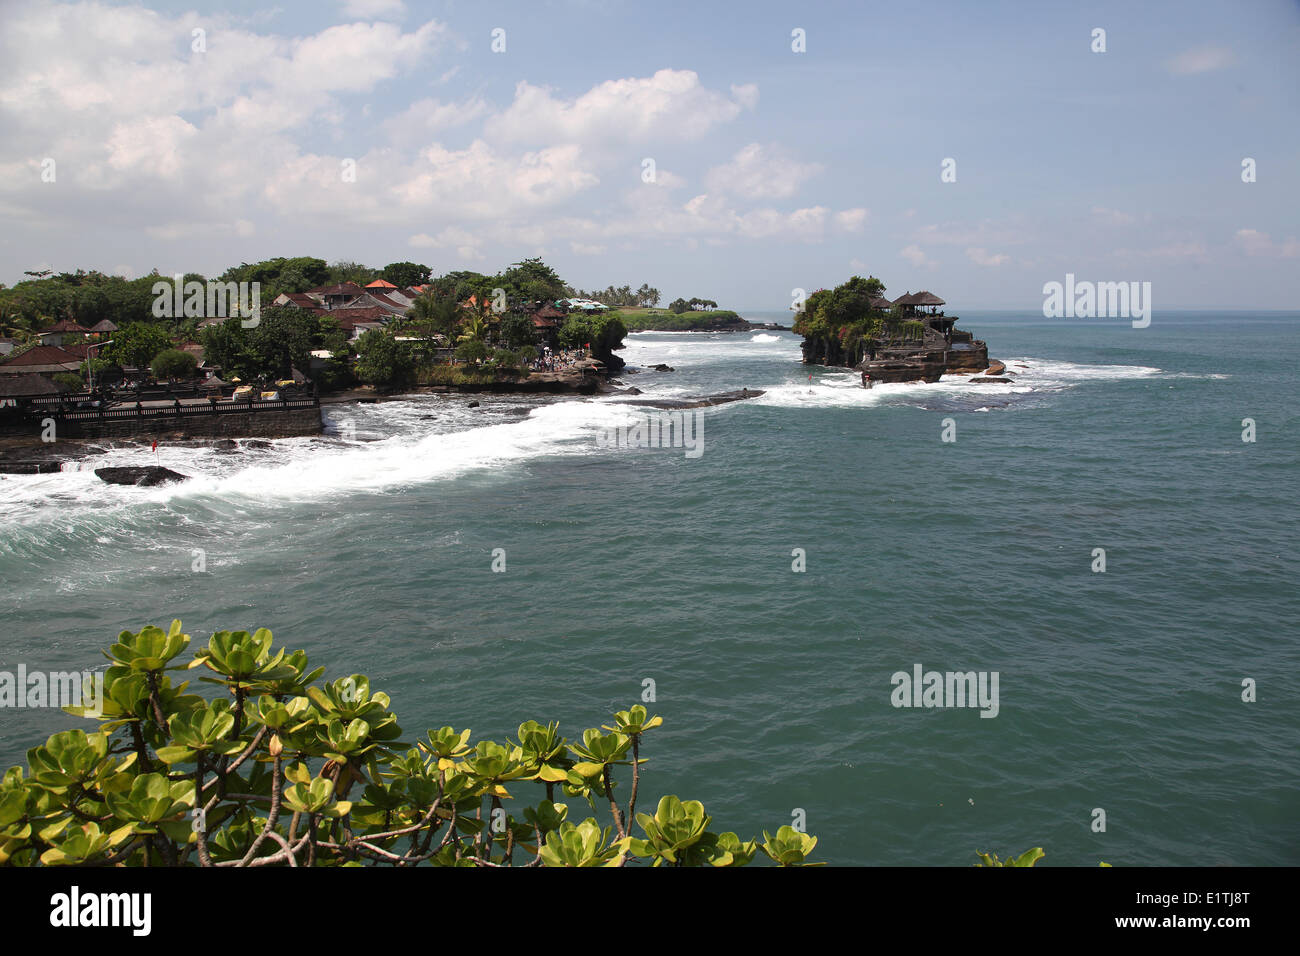 The Tanah Lot sea temple was built on top of a huge rock surrounded by the sea, around five hundred years ago. The temple is one of 7 sea temples in Bali and it's considered as one of the most beautiful spots on the west cost of Bali, Indonesia, May 2, 20 Stock Photo